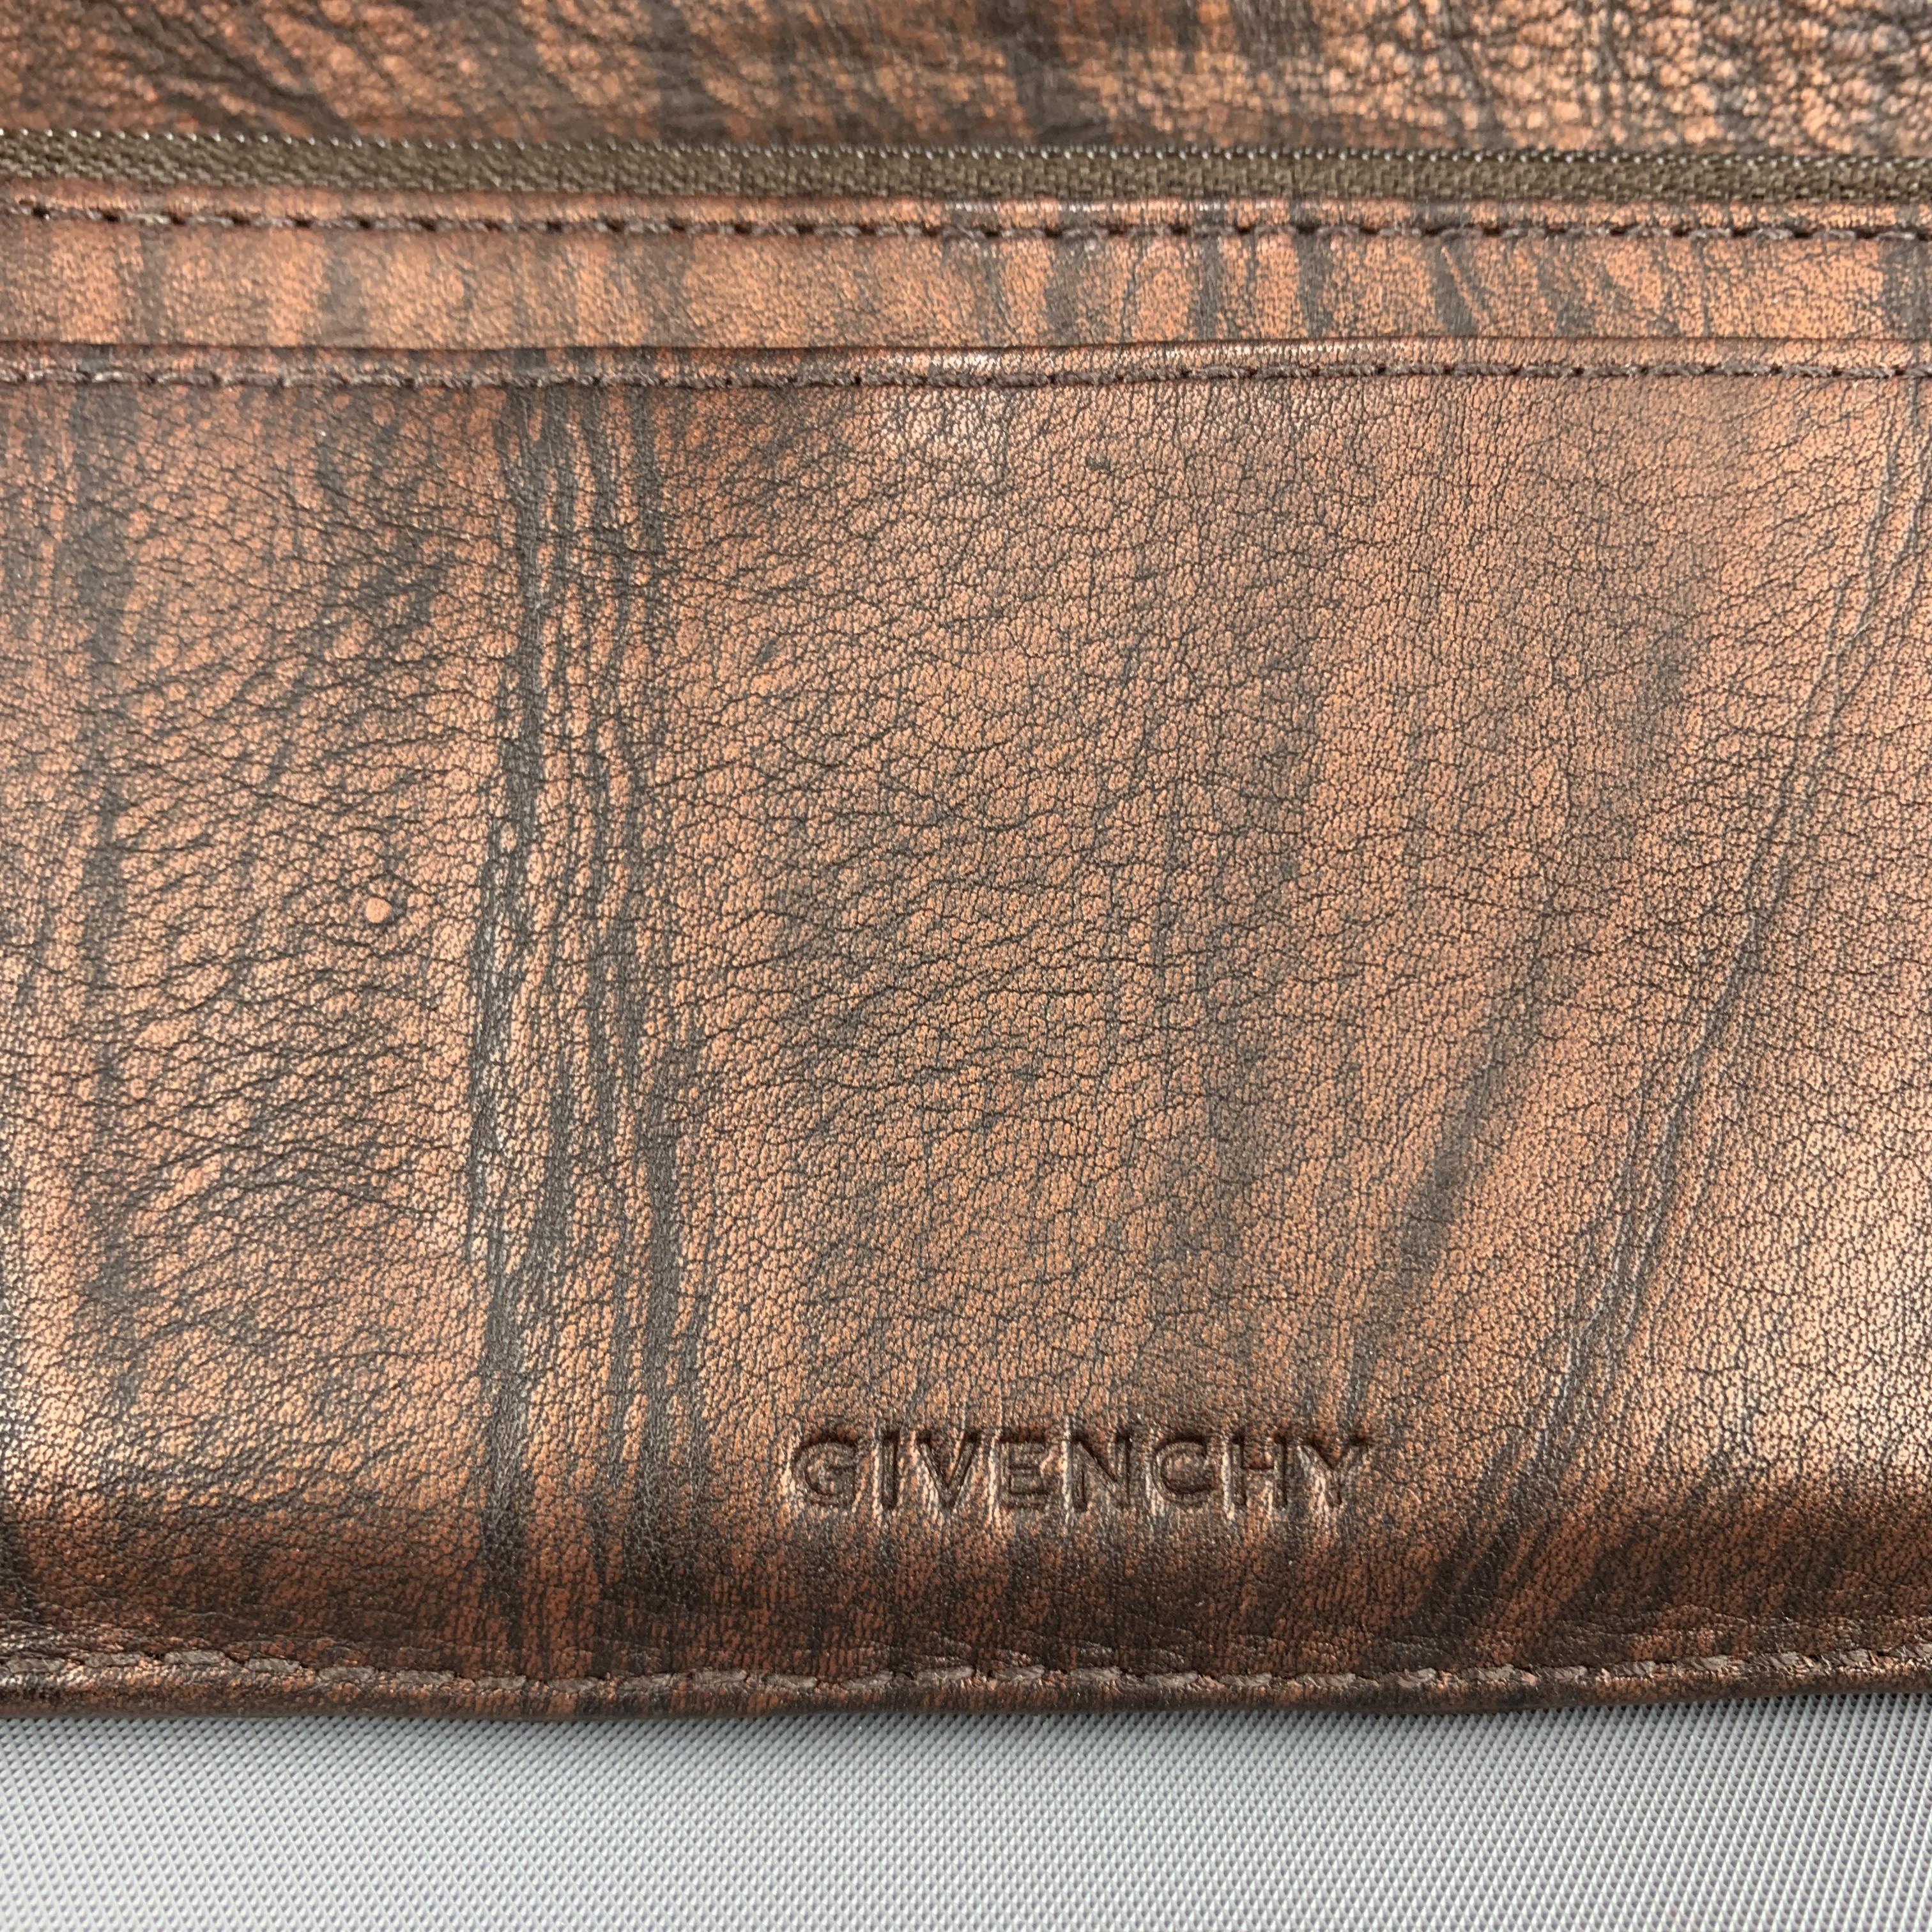 GIVENCHY Brown Leather & Gold Monogram Gathered Canvas Wallet 3